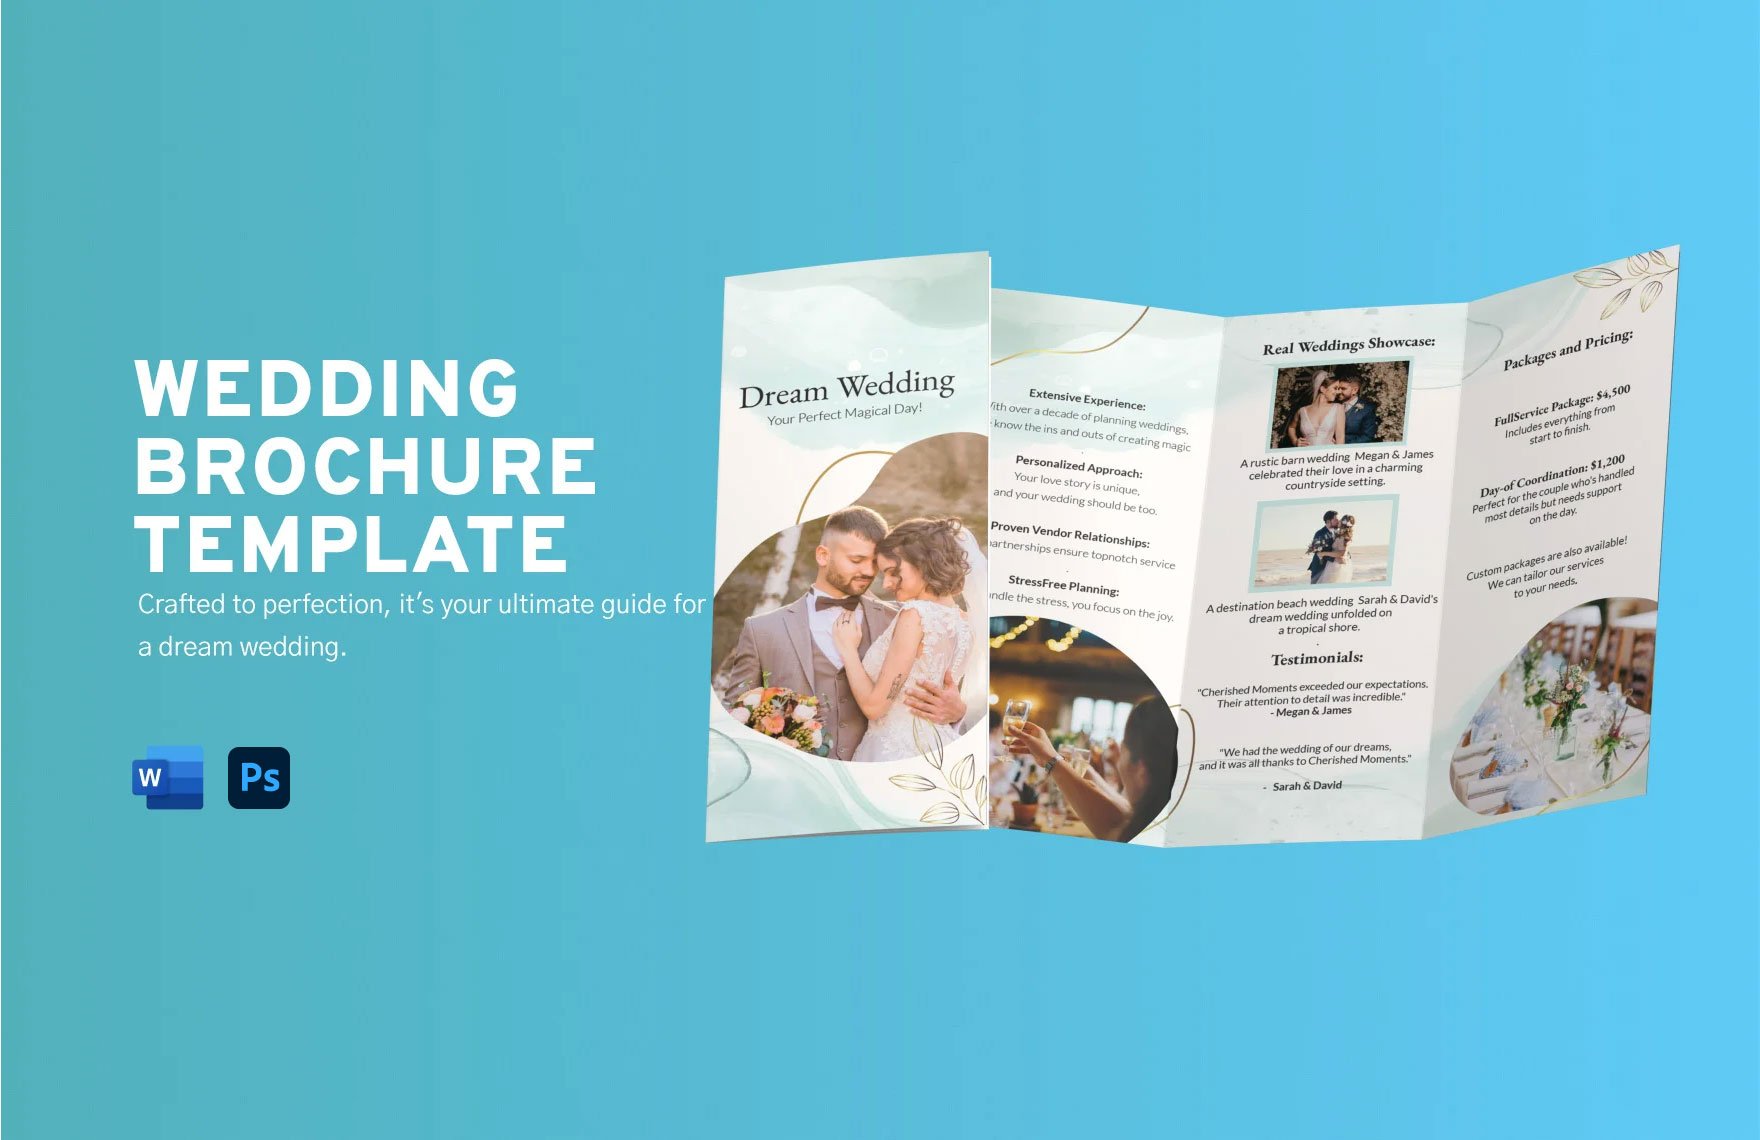 Wedding Brochure Template in Word, Illustrator, PSD, Apple Pages, Publisher, InDesign